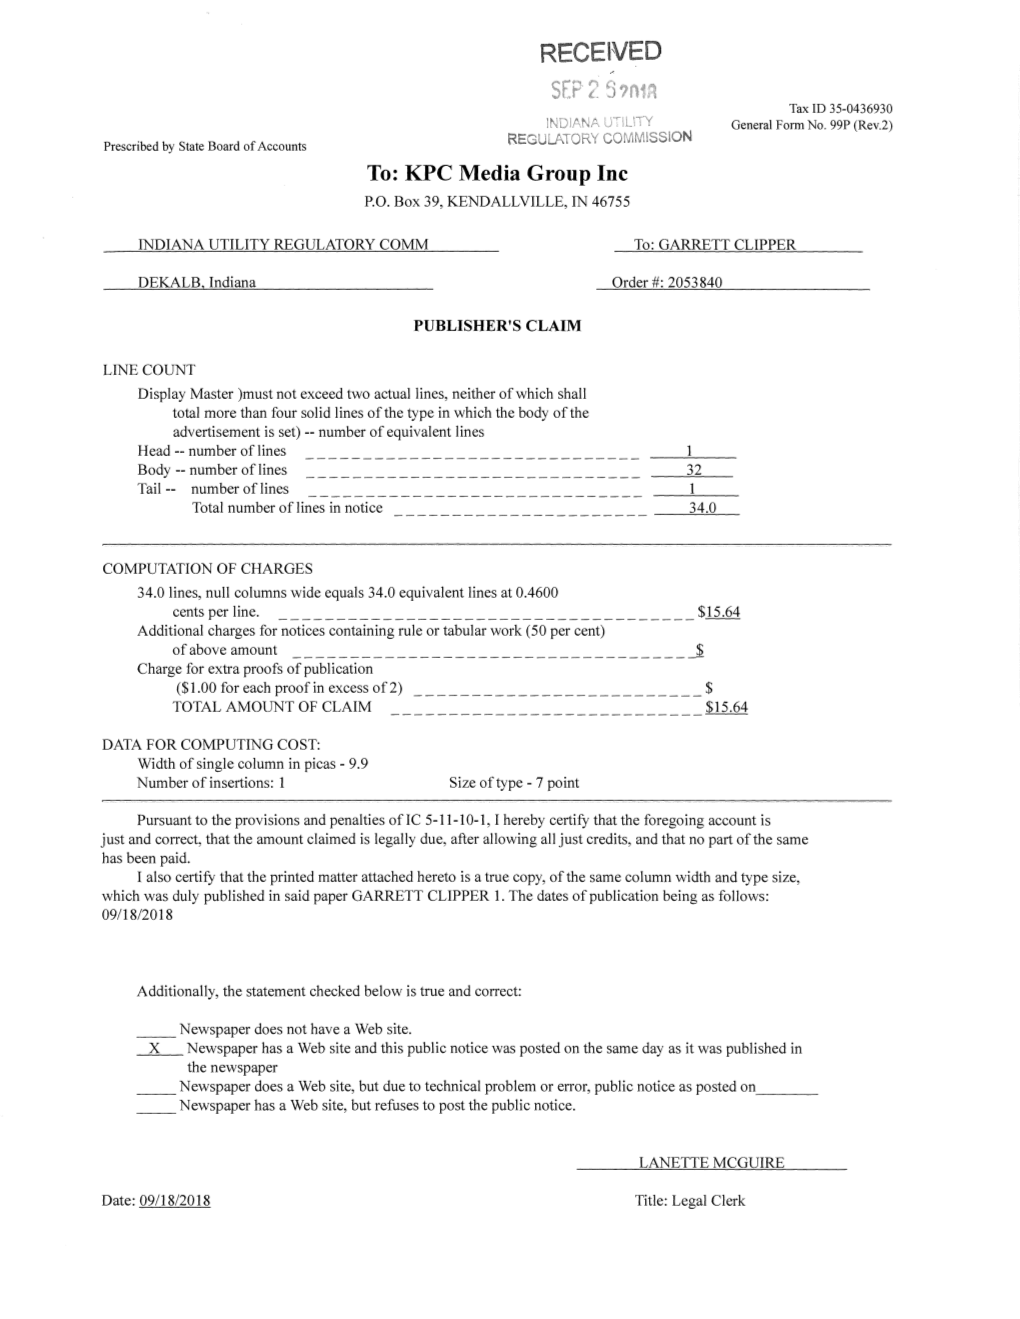 SEP 2 5?N1a Tax ID 35-0436930 INDIANA UTILITY General Form No